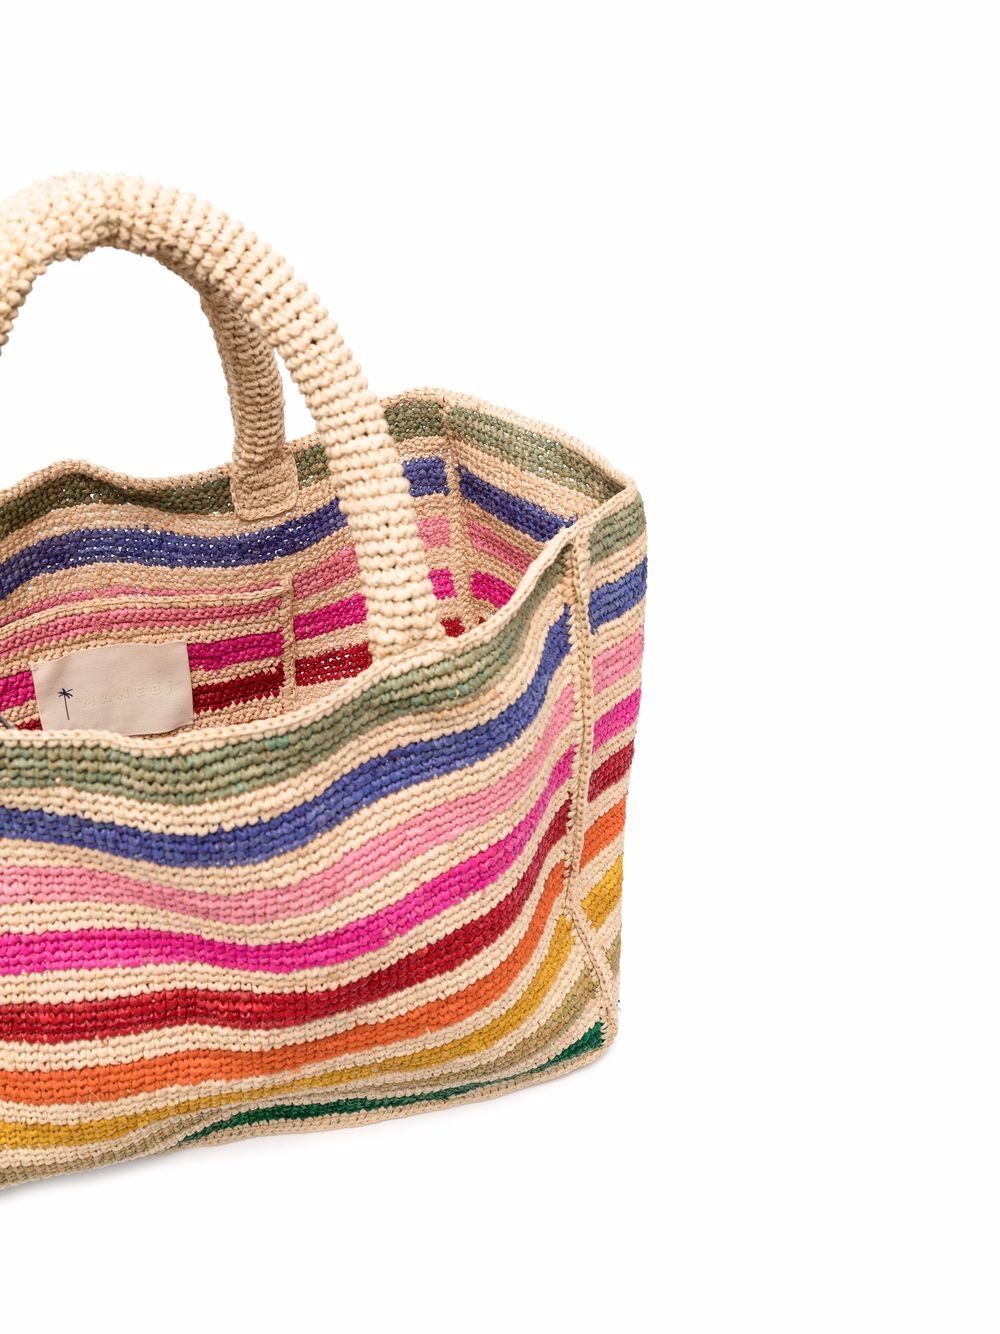 Mehry MU Women's Large Raffia Embroidered Rainbow Tote - Natural - Fall Sale